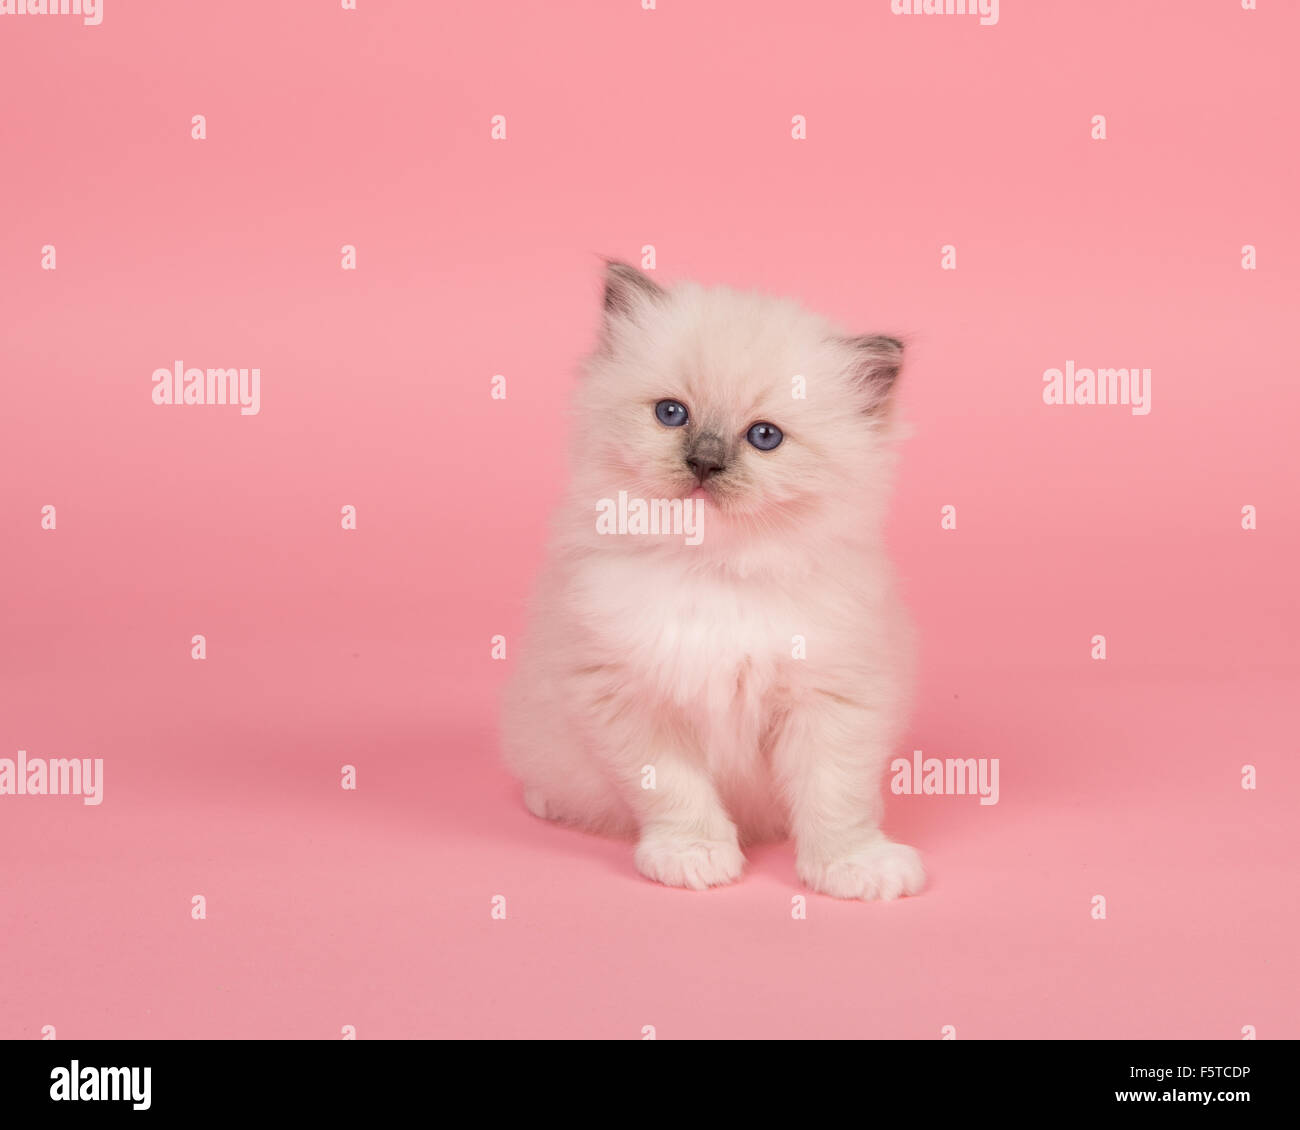 Cute ragdoll baby cat on a pink background Stock Photo